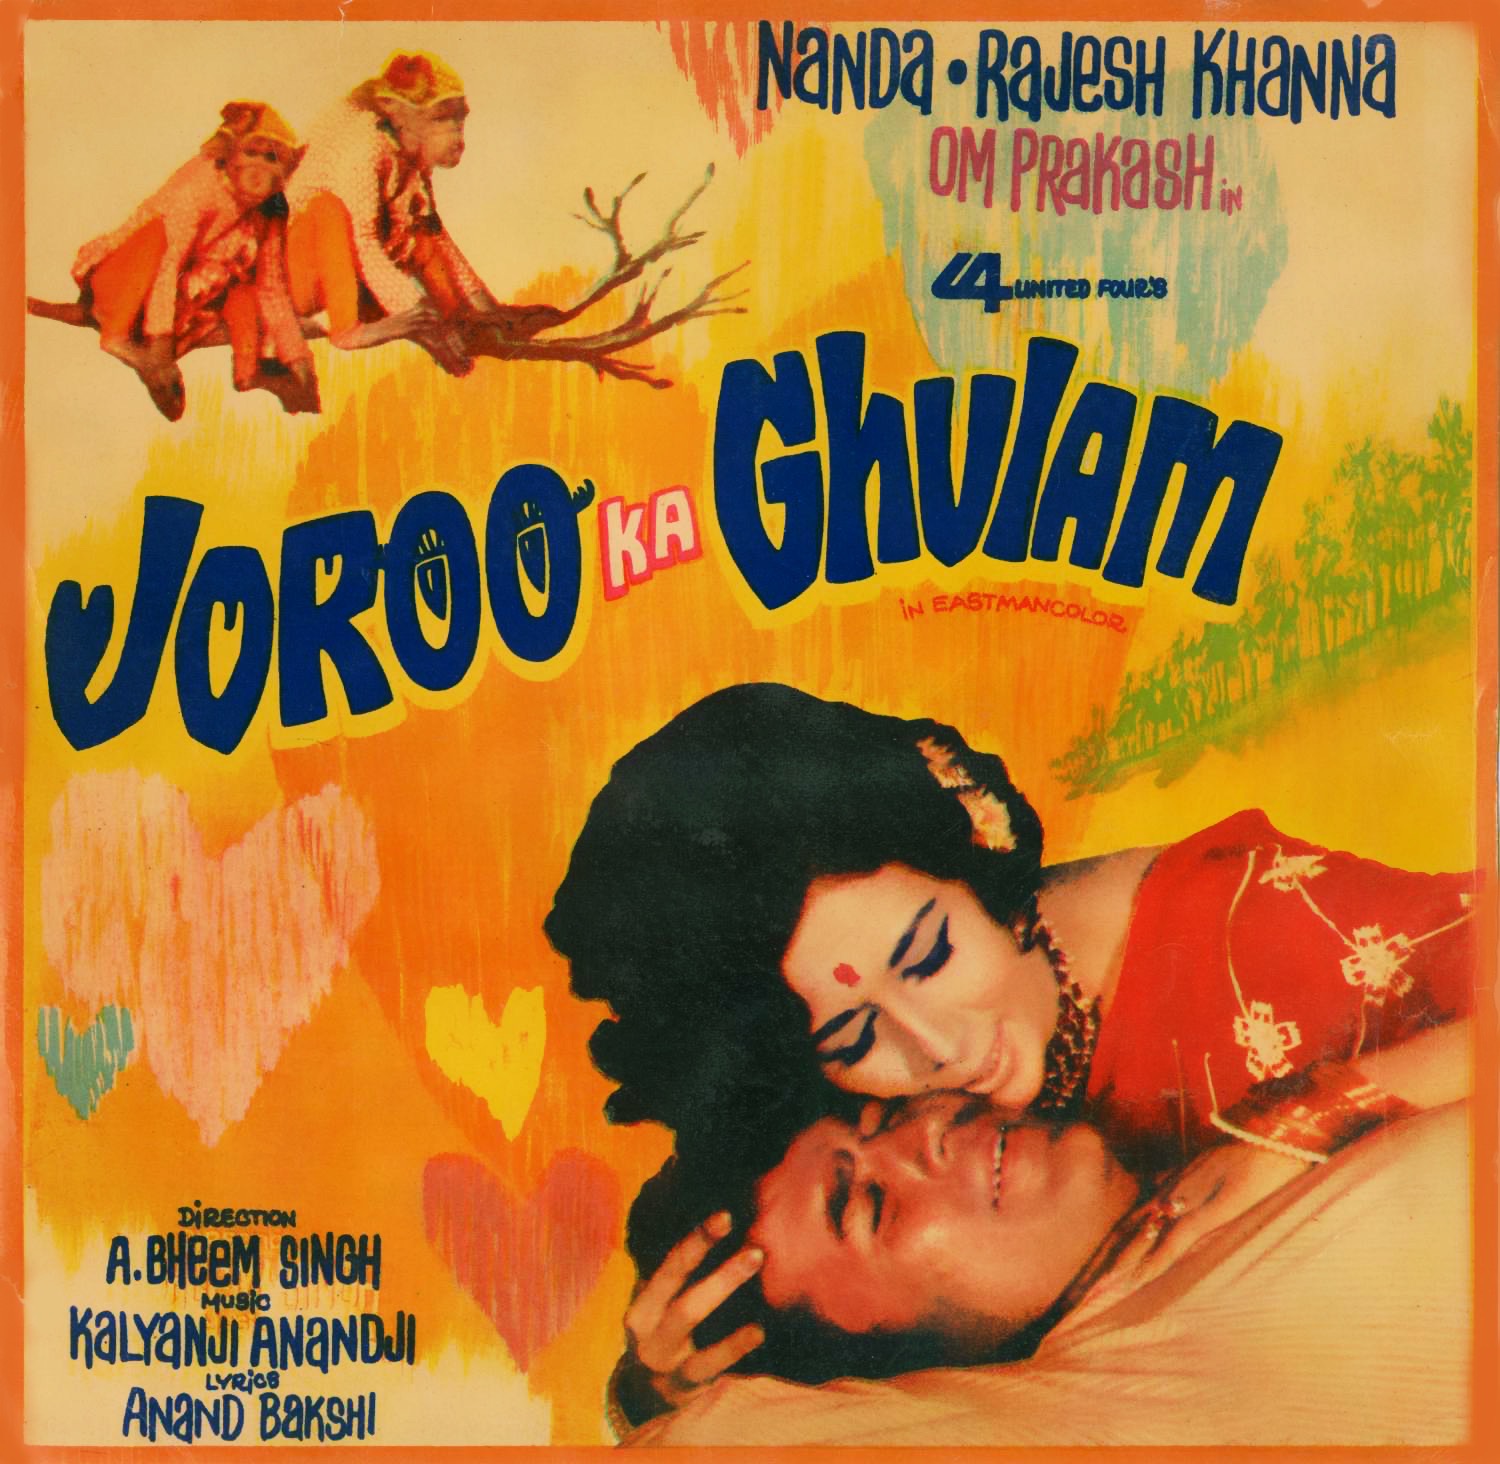 buster crouch recommends joru ka ghulam movie pic